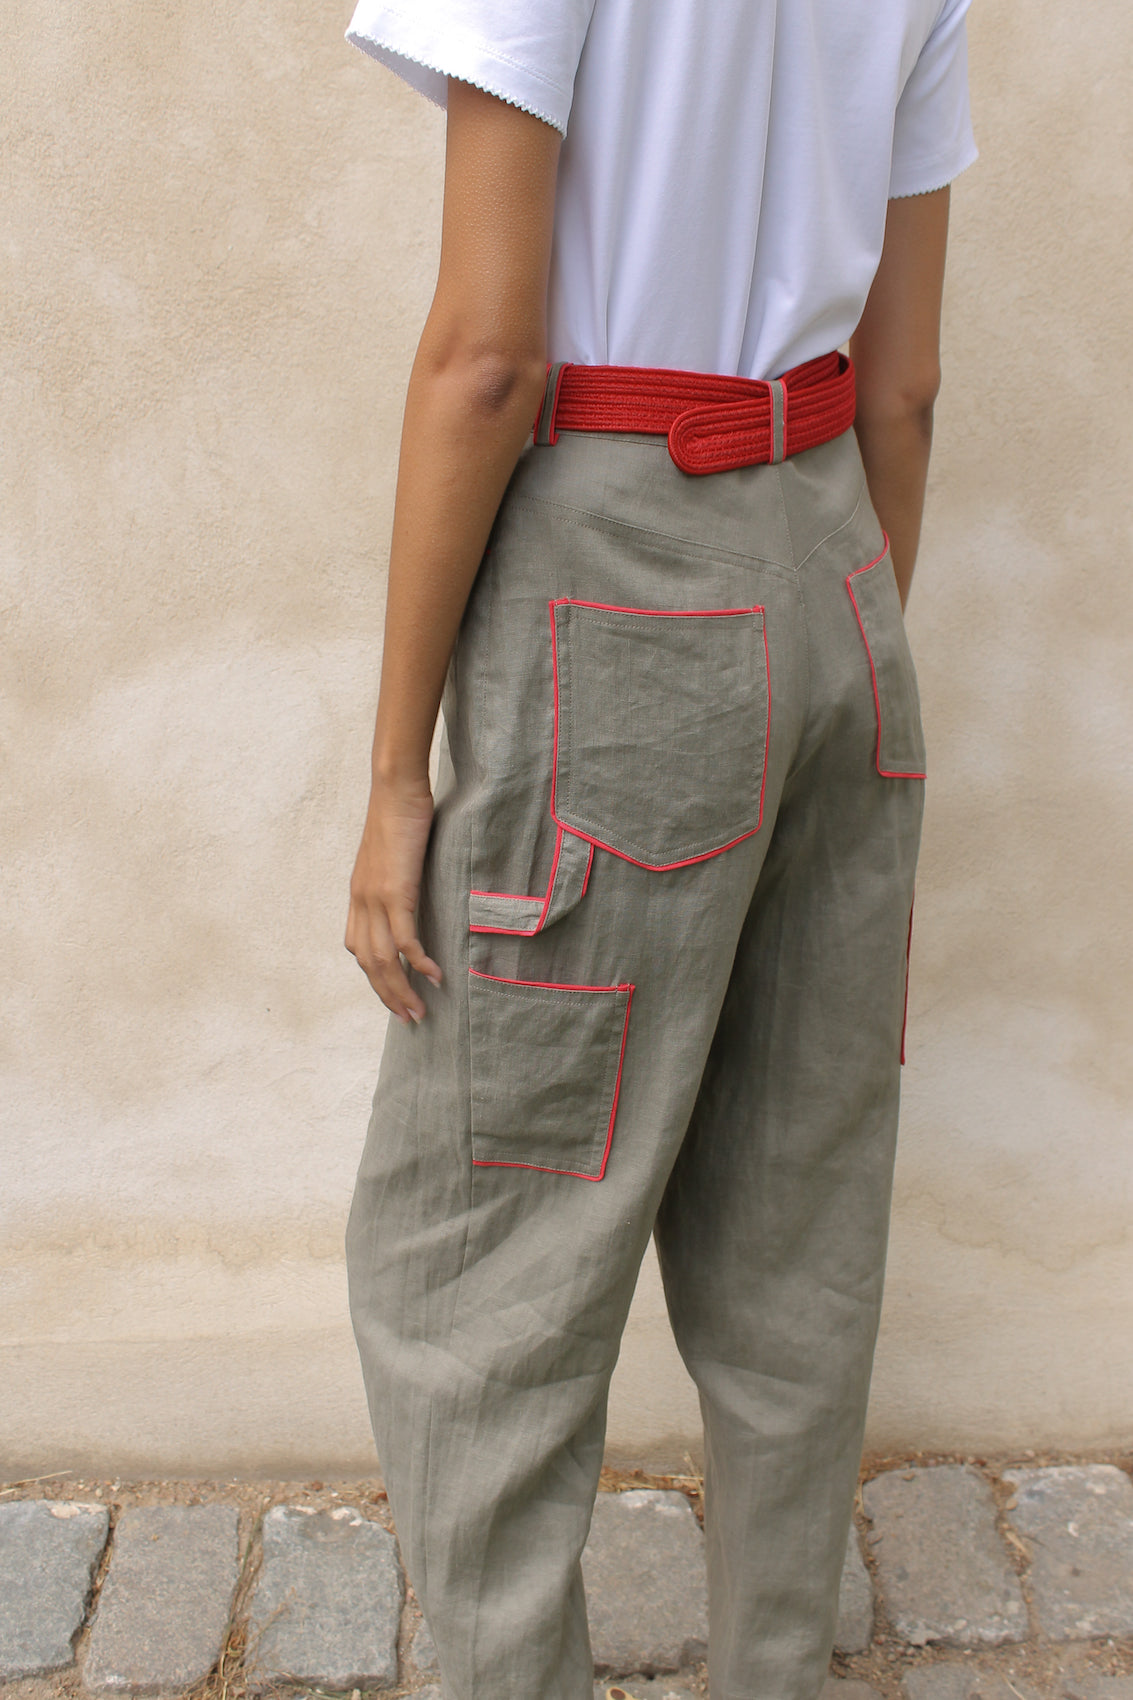 The Emma Pants in Khaki Linen. The pants feature cargo details on the side and large pockets with piping details in a contrasting color. Easily modify the shape of the pants with a button adjustment.  Style them with a t-shirt, blouse, or a matching Emma Jacket in Khaki.  Also available in Orange, Pink and Navy.  Material: 100% linen. Lining: 100% viscose.  The model is 175cm (5'9") and is wearing a size S.